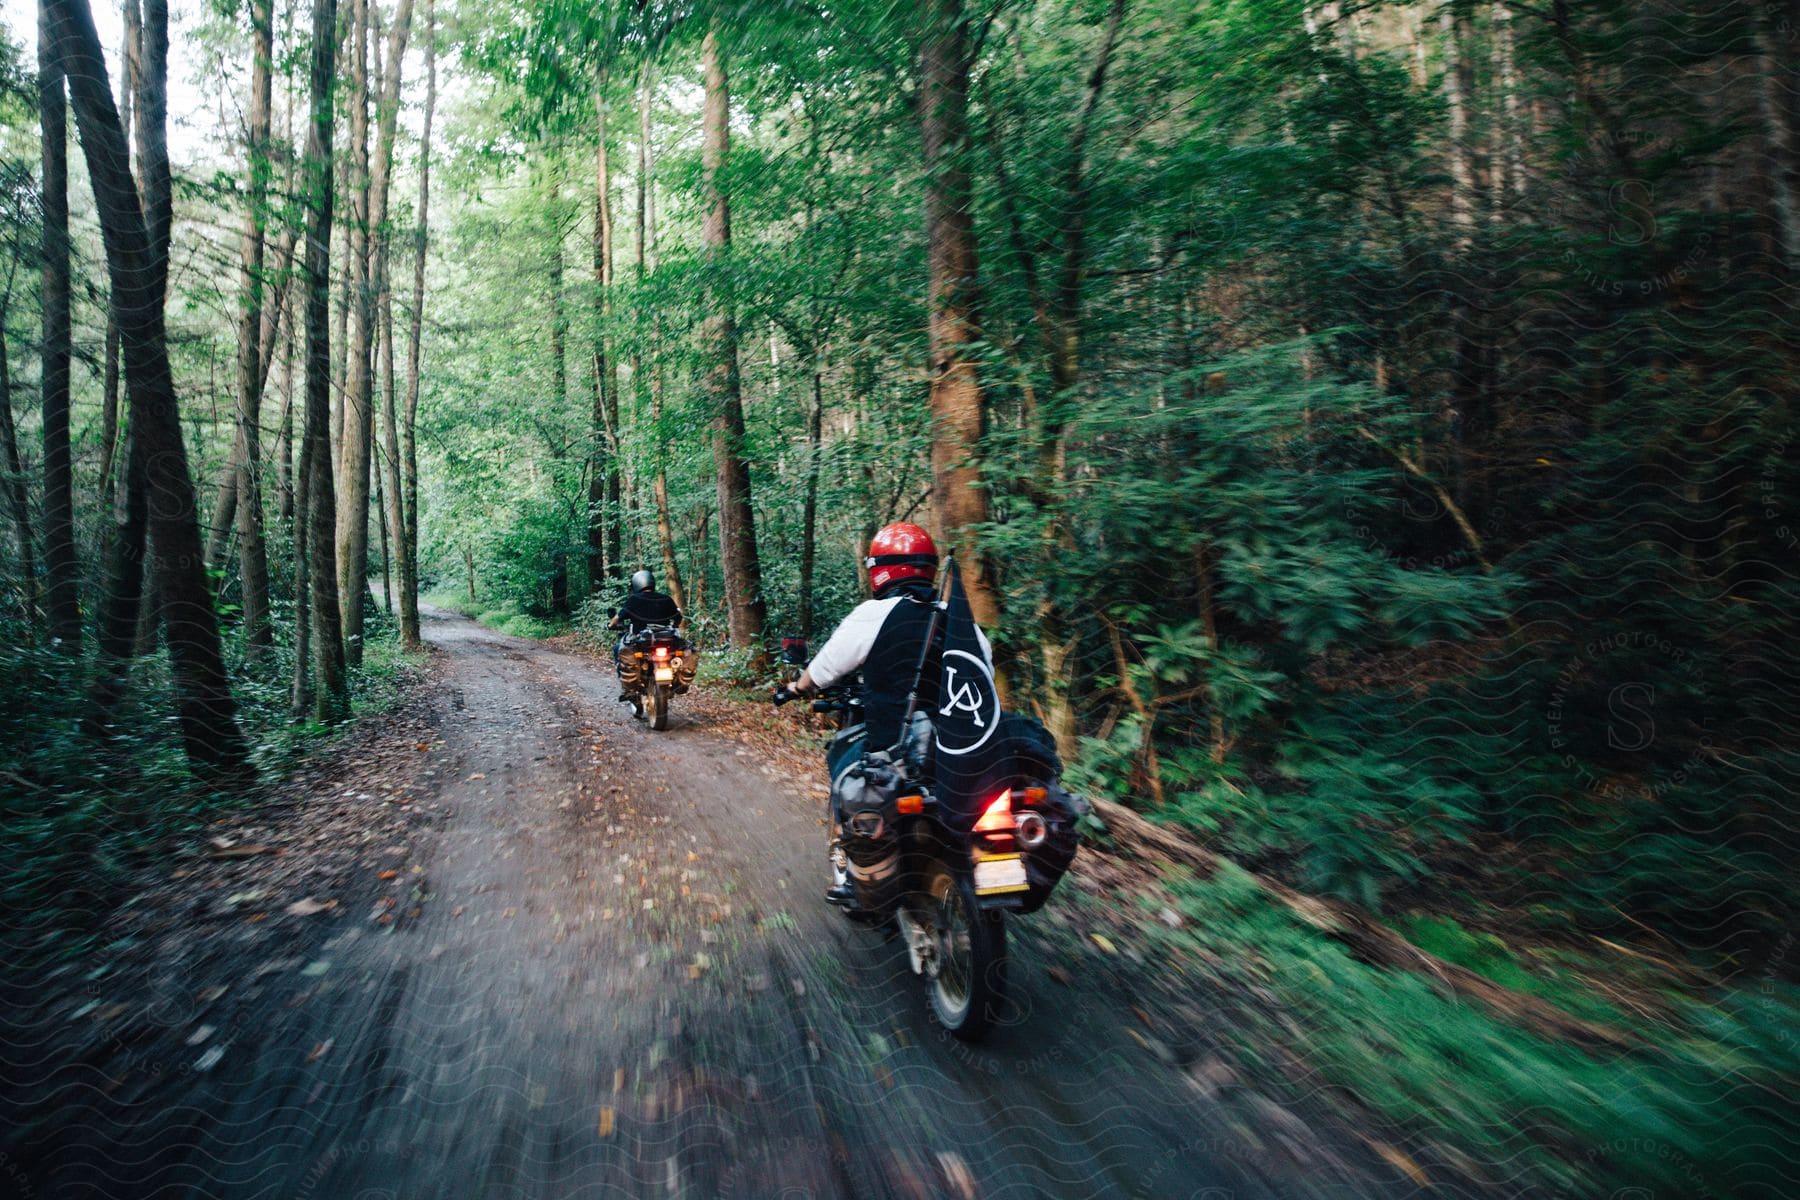 Two people on motorcycles drive through a forest on a road trip